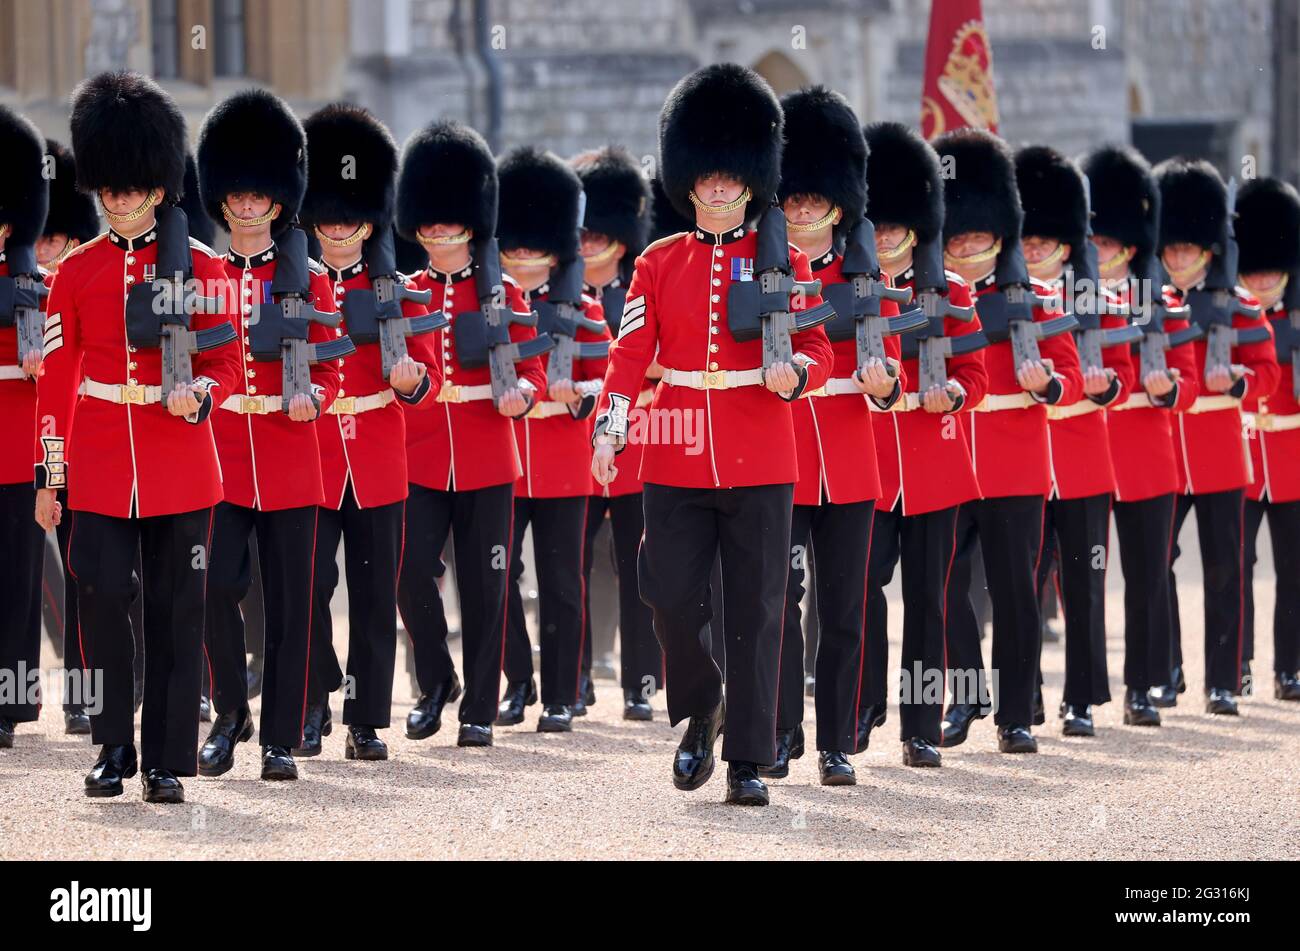 soldiers-of-the-queens-company-first-battalion-grenadier-guards-position-themselves-in-the-quadrangle-of-windsor-castle-ahead-of-us-president-joe-biden-arriving-to-meet-queen-elizabeth-ii-picture-date-sunday-june-13-2021-2G316KJ.jpg